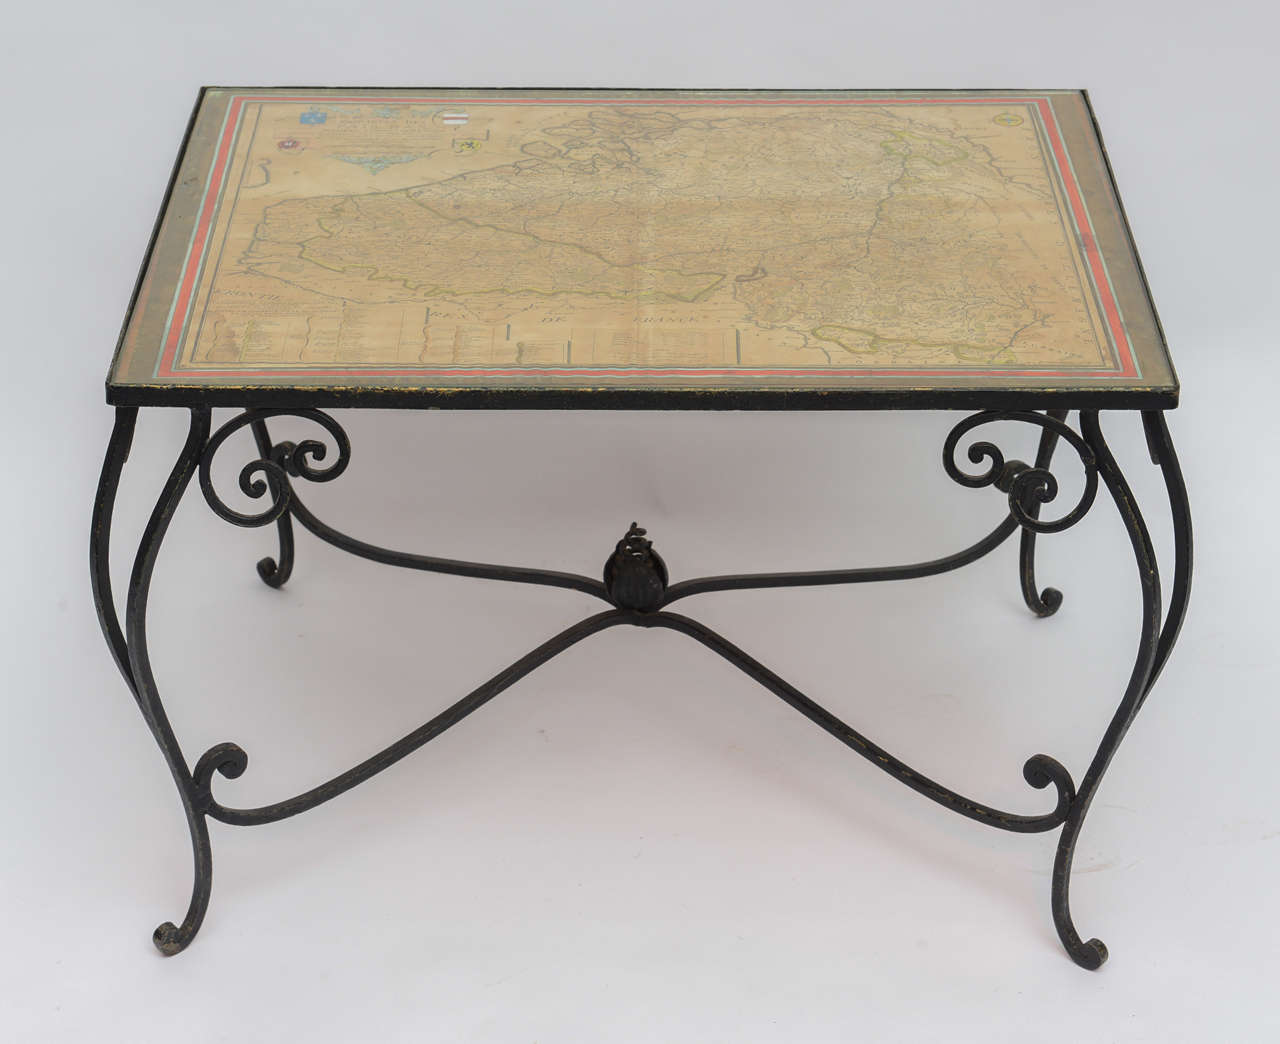 Fantastic little French wrought iron table with antique map of France under glass top. Map is hand colored, dated 1716 and signed by the known French map maker 